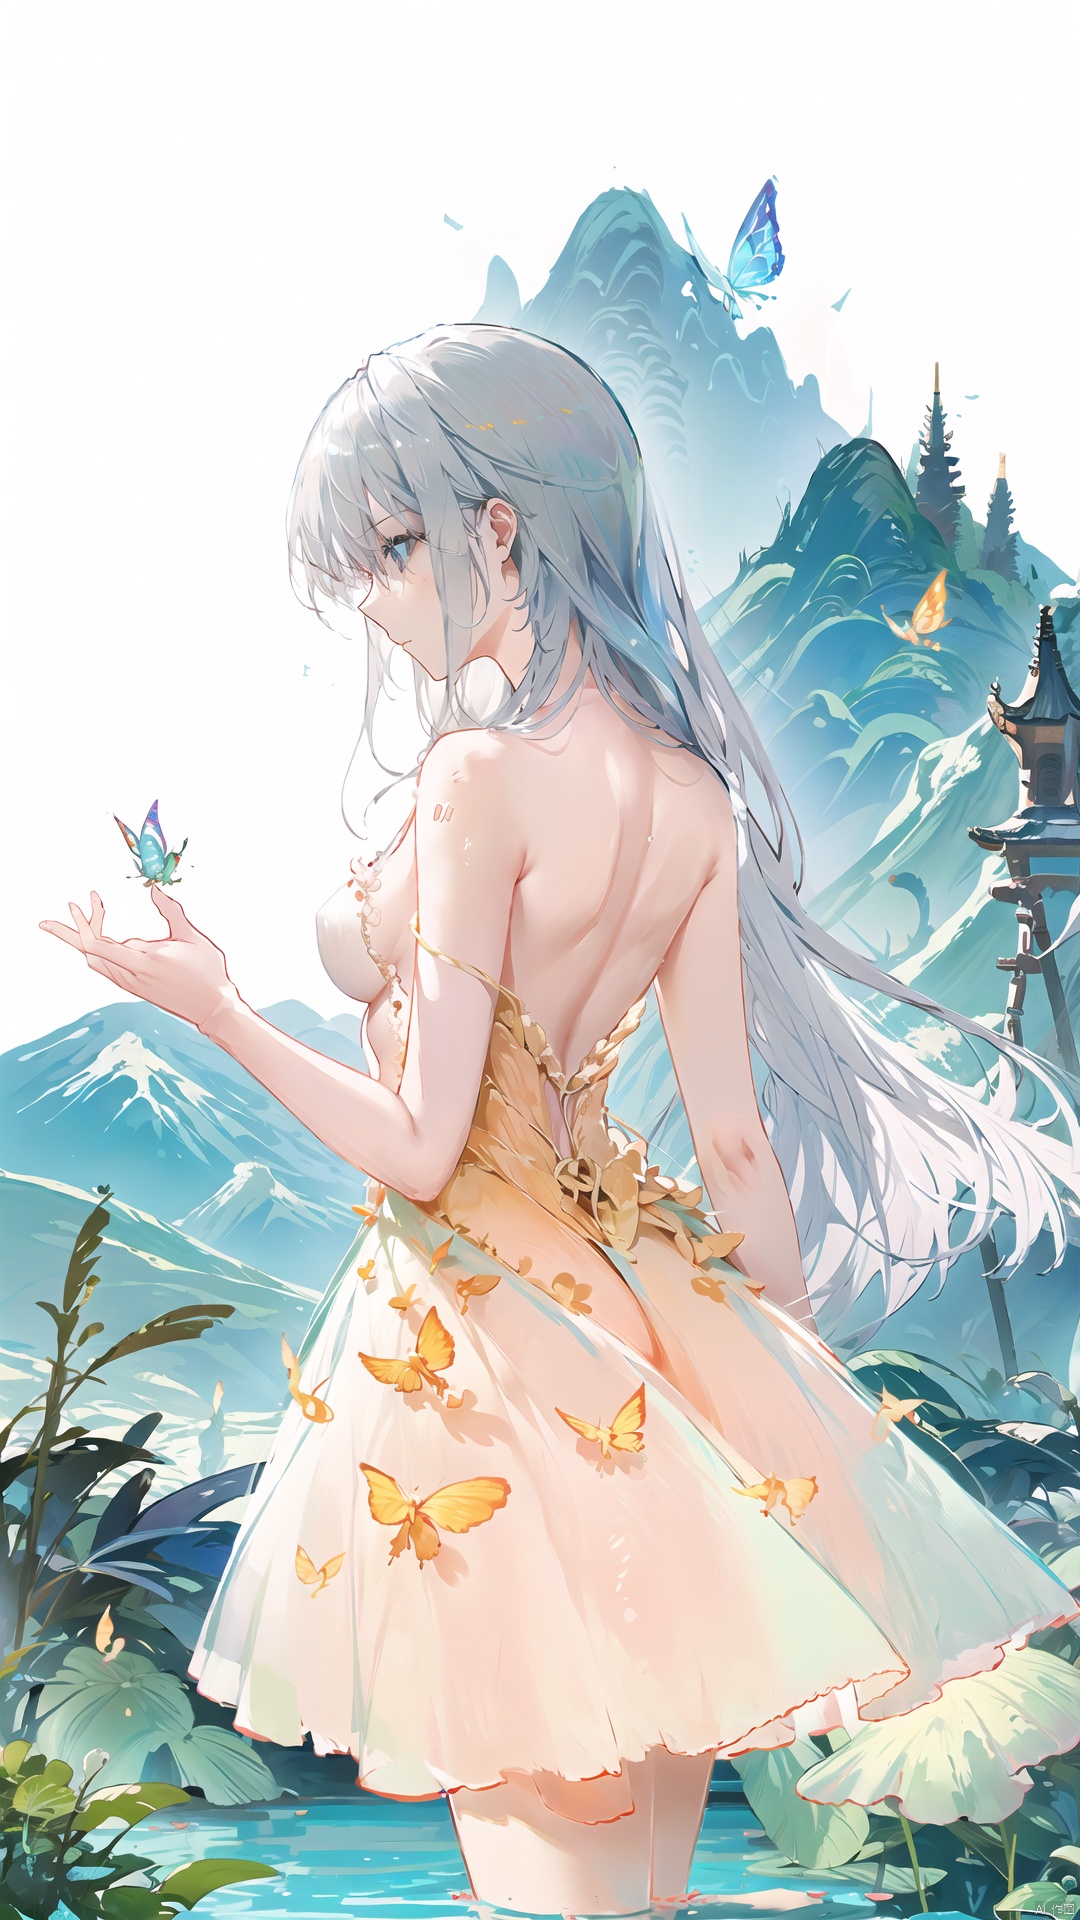 blue ru_qun,best_quality,head,original_outfit,hanfu,clear details,masterpiece, best_quality, clear details,1girl,garden background, butterfly on finger,blue eyes,white hair,long hair,big eyes ,yuzu,liquid clothes,girl,Anime,azur lane, Chinese style, best quality, Apricot eye,foreground,bridge,pond,lotus,background,mountains,pagoda,angle,side view,light,soft,warm,color,pastel,atmosphere,serene,elegant